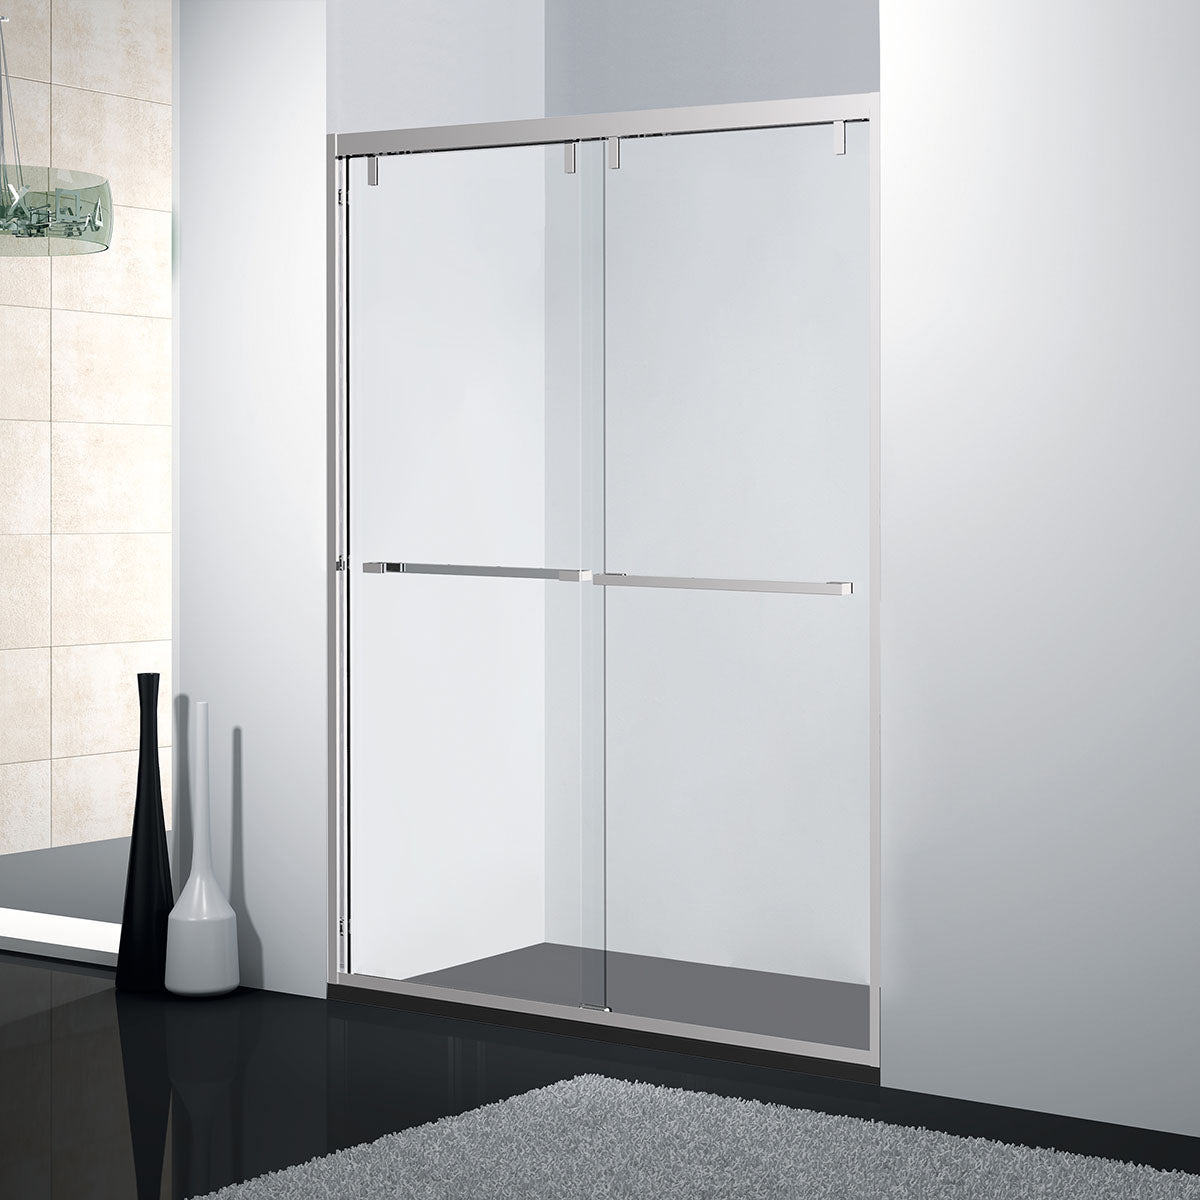 60" Bypass Shower Door with Klearteck Treatment (3/8" Thickness) (Brushed Nickel) AC23 series - iStyle Bath